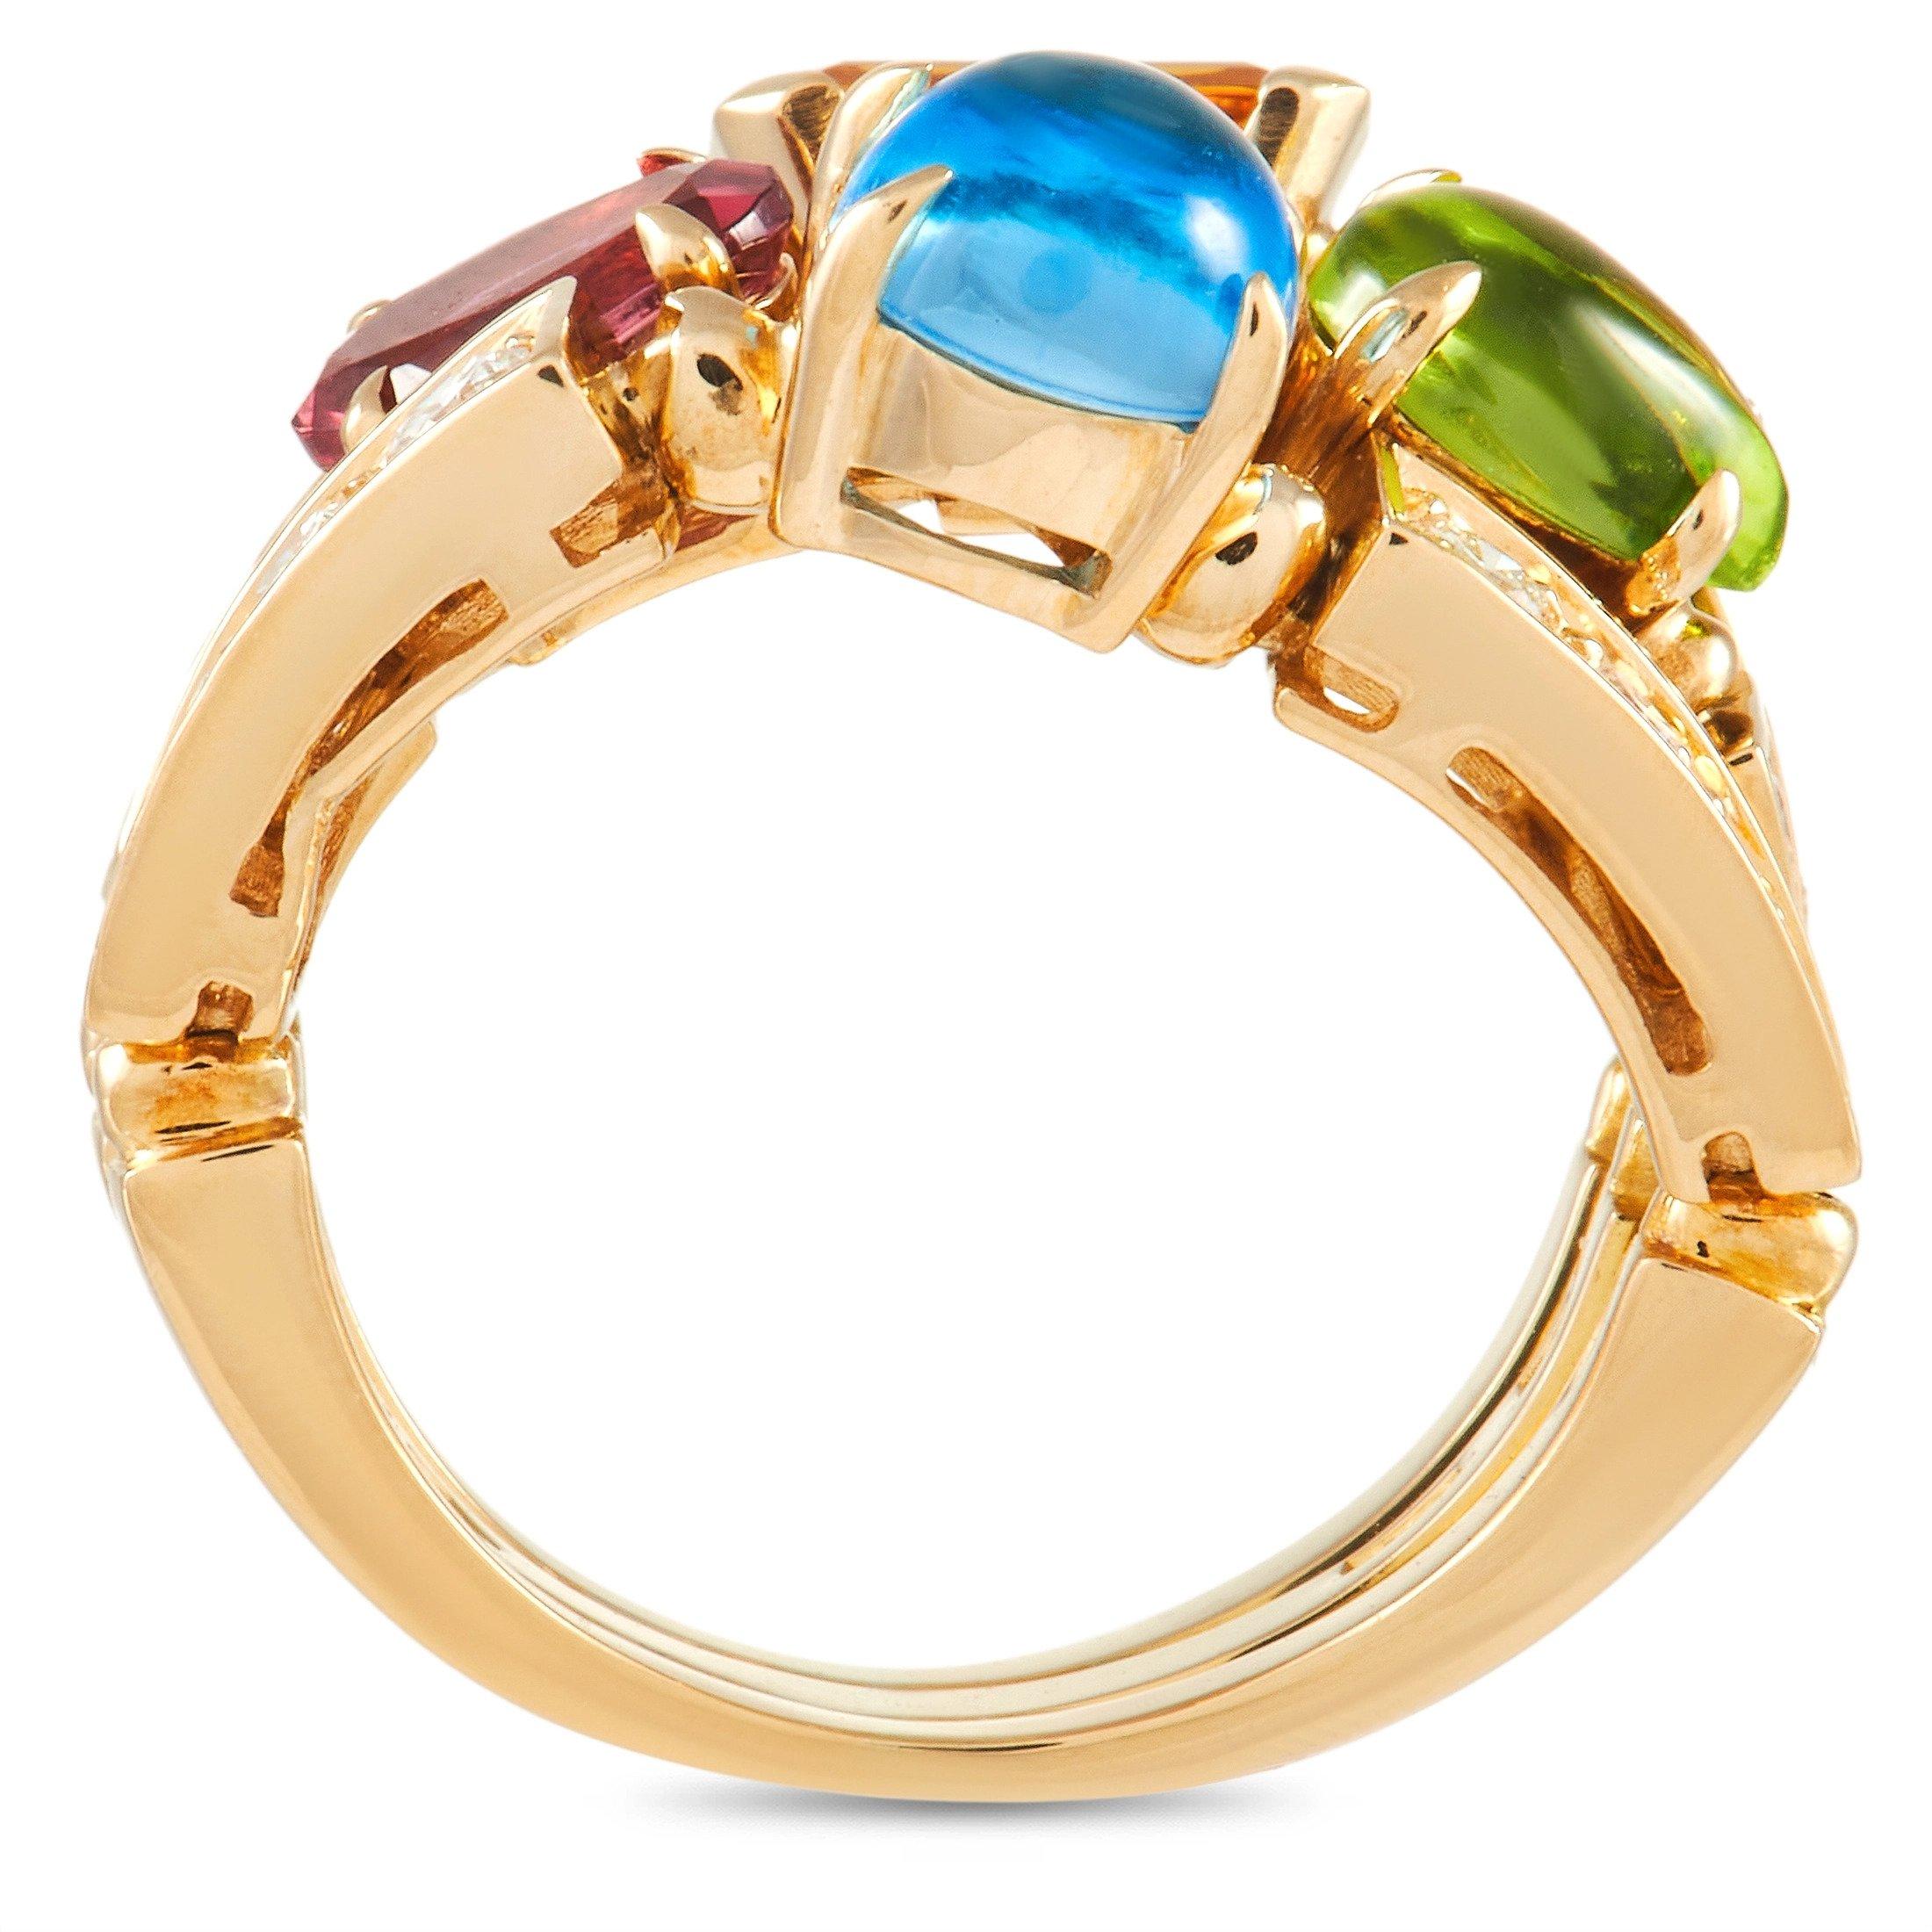 Brightly colored gemstones ensure that this Bvlgari Allegra ring never fades into the background. A luxury piece with a playful sense of style, this piece includes an 18K yellow gold setting that features a bold 10mm wide band and a 6mm top height.